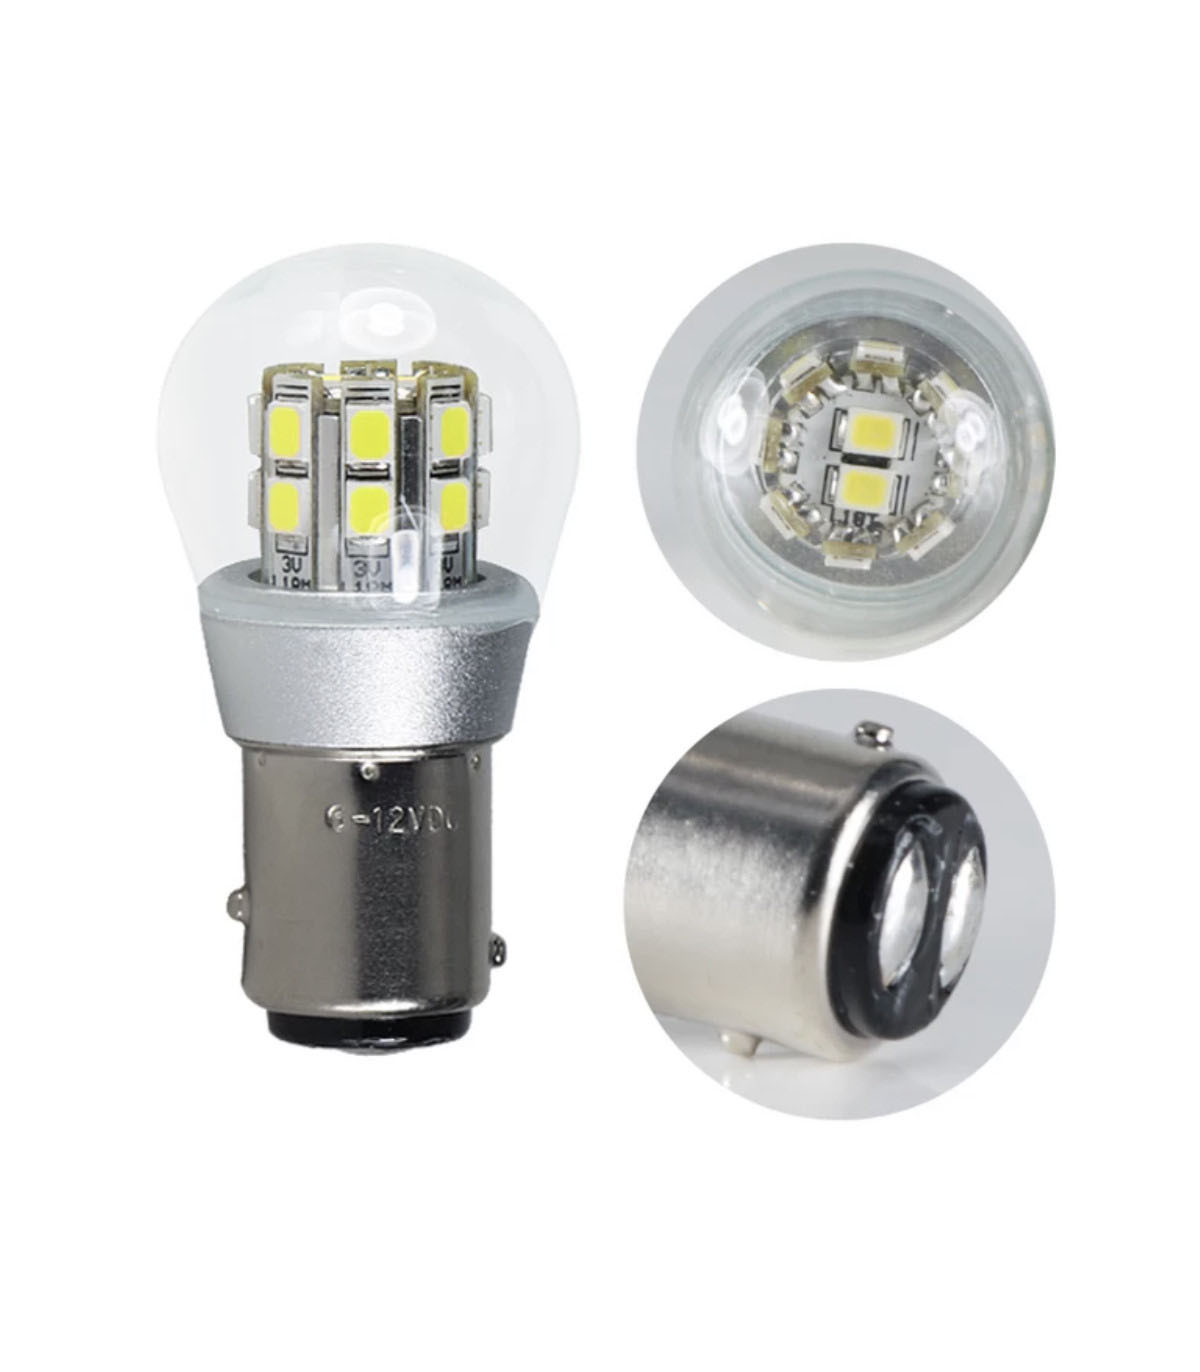 SIGNALISATION LED-BULB 6 TO 12V, STOP/STAND - WARM WHITE, P21/5w, BAY15D -  Matthys